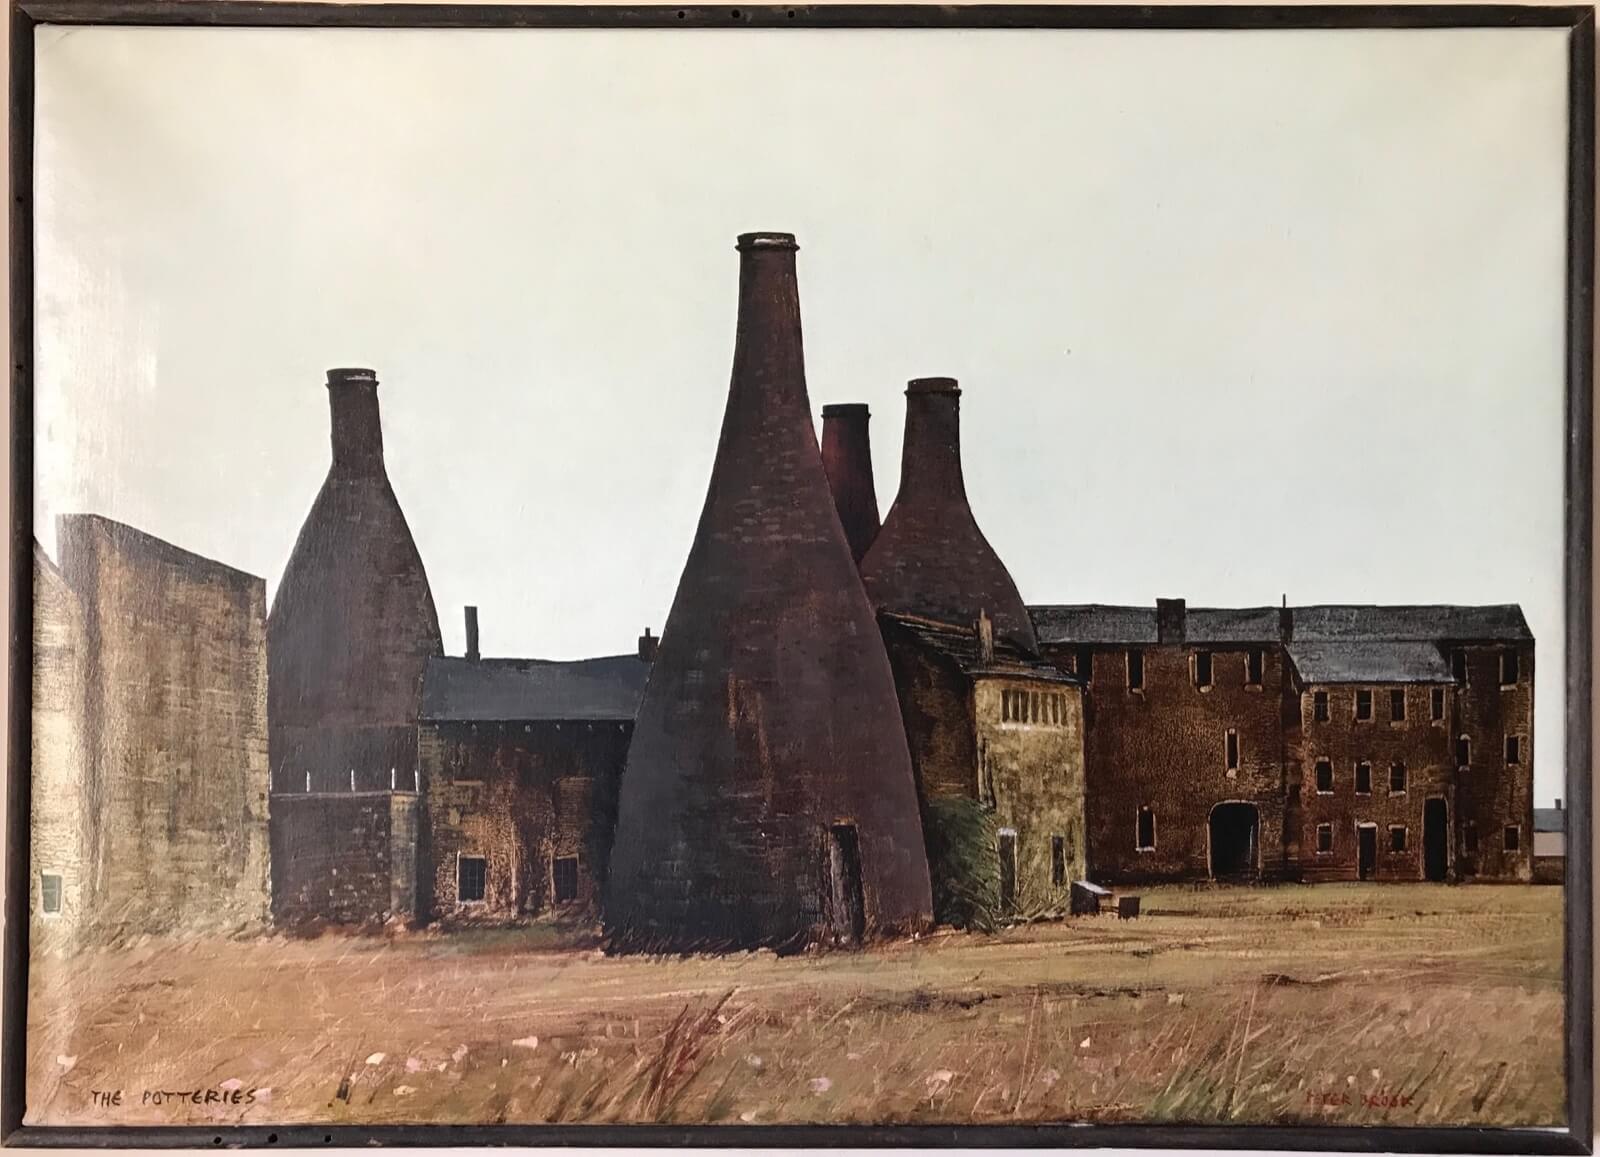 Peter Brook - The Potteries